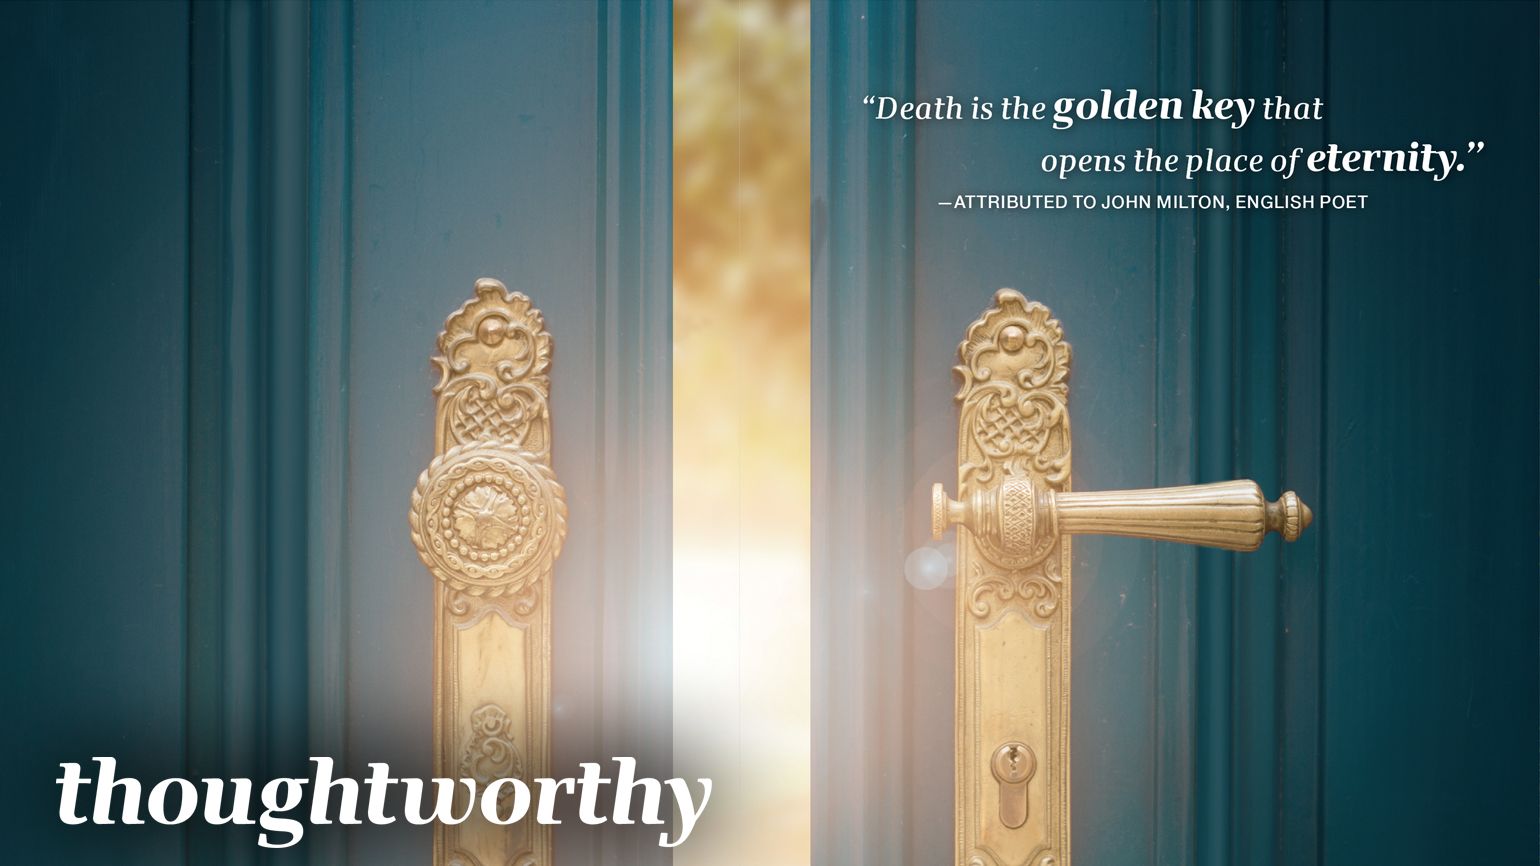 “Death is the golden key that opens the place of eternity.”—John Milton, English Poet